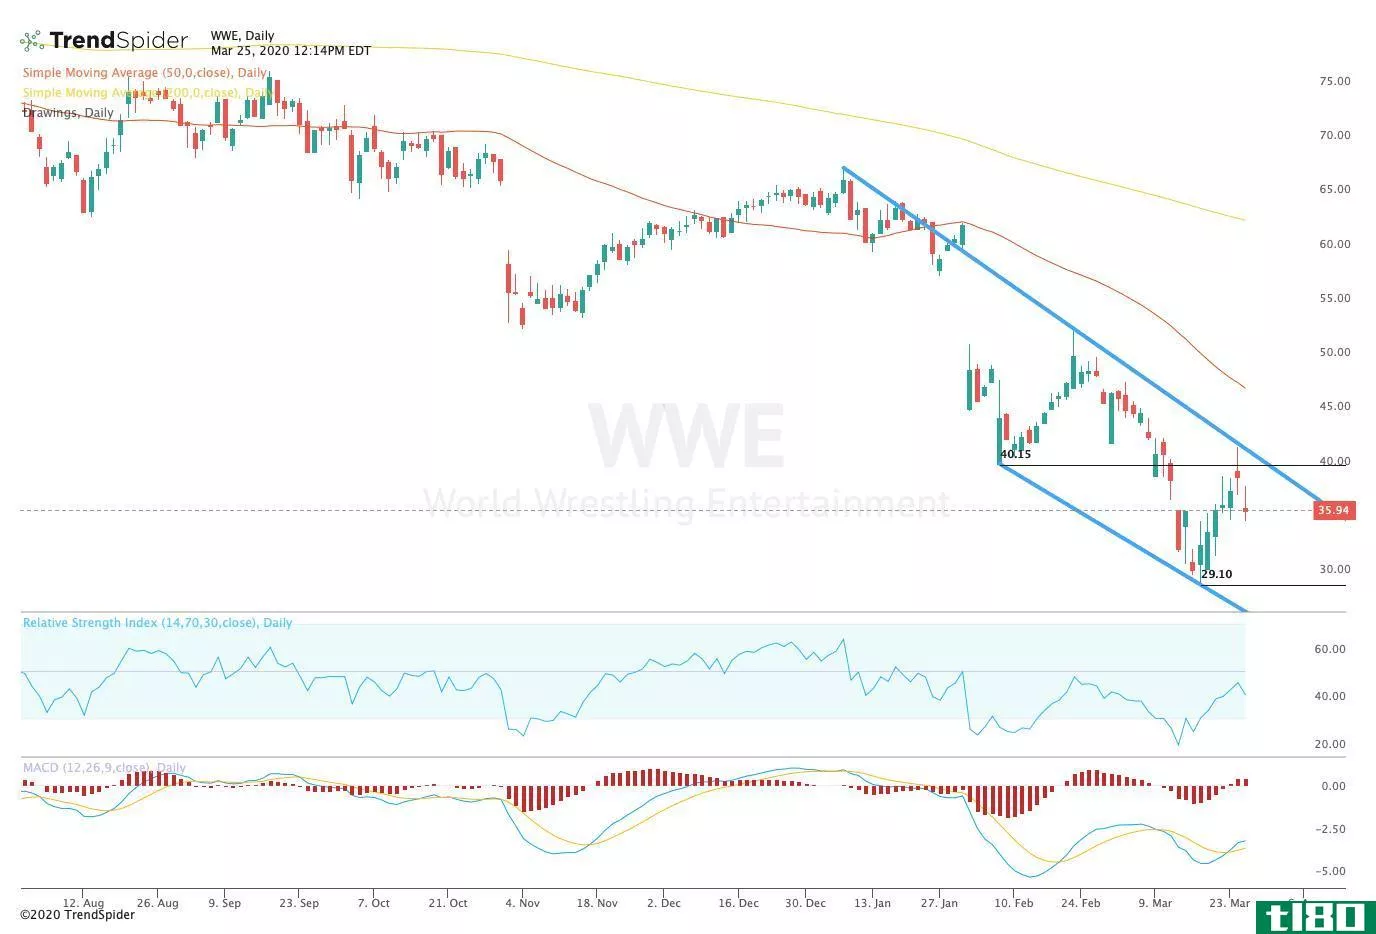 Chart showing the share price performance of World Wrestling Entertainment, Inc. (WWE)